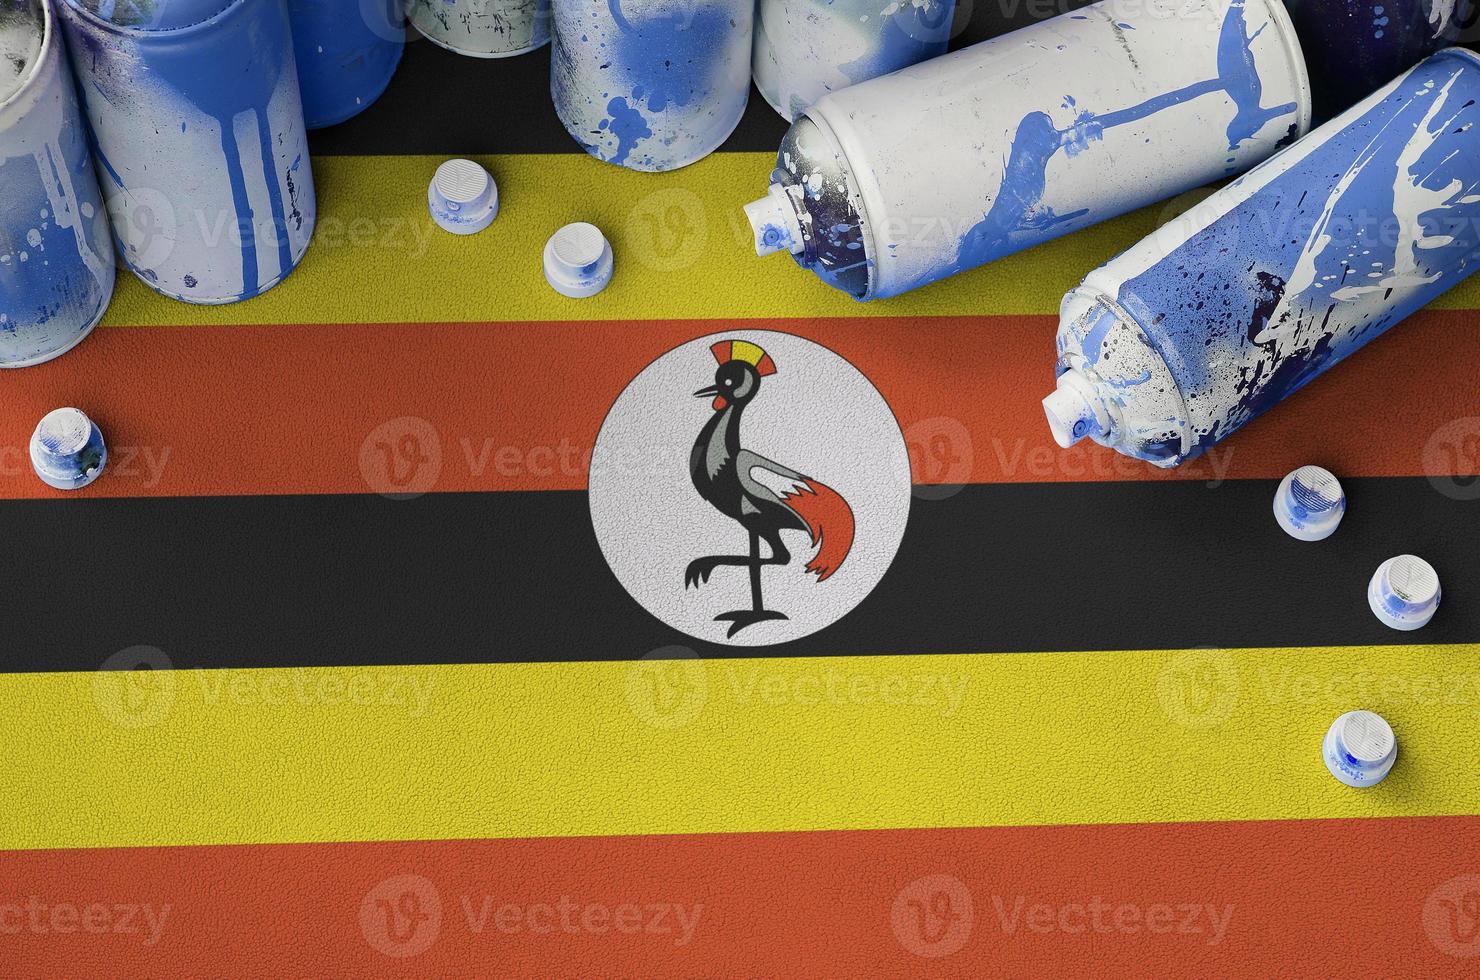 Uganda flag and few used aerosol spray cans for graffiti painting. Street art culture concept photo